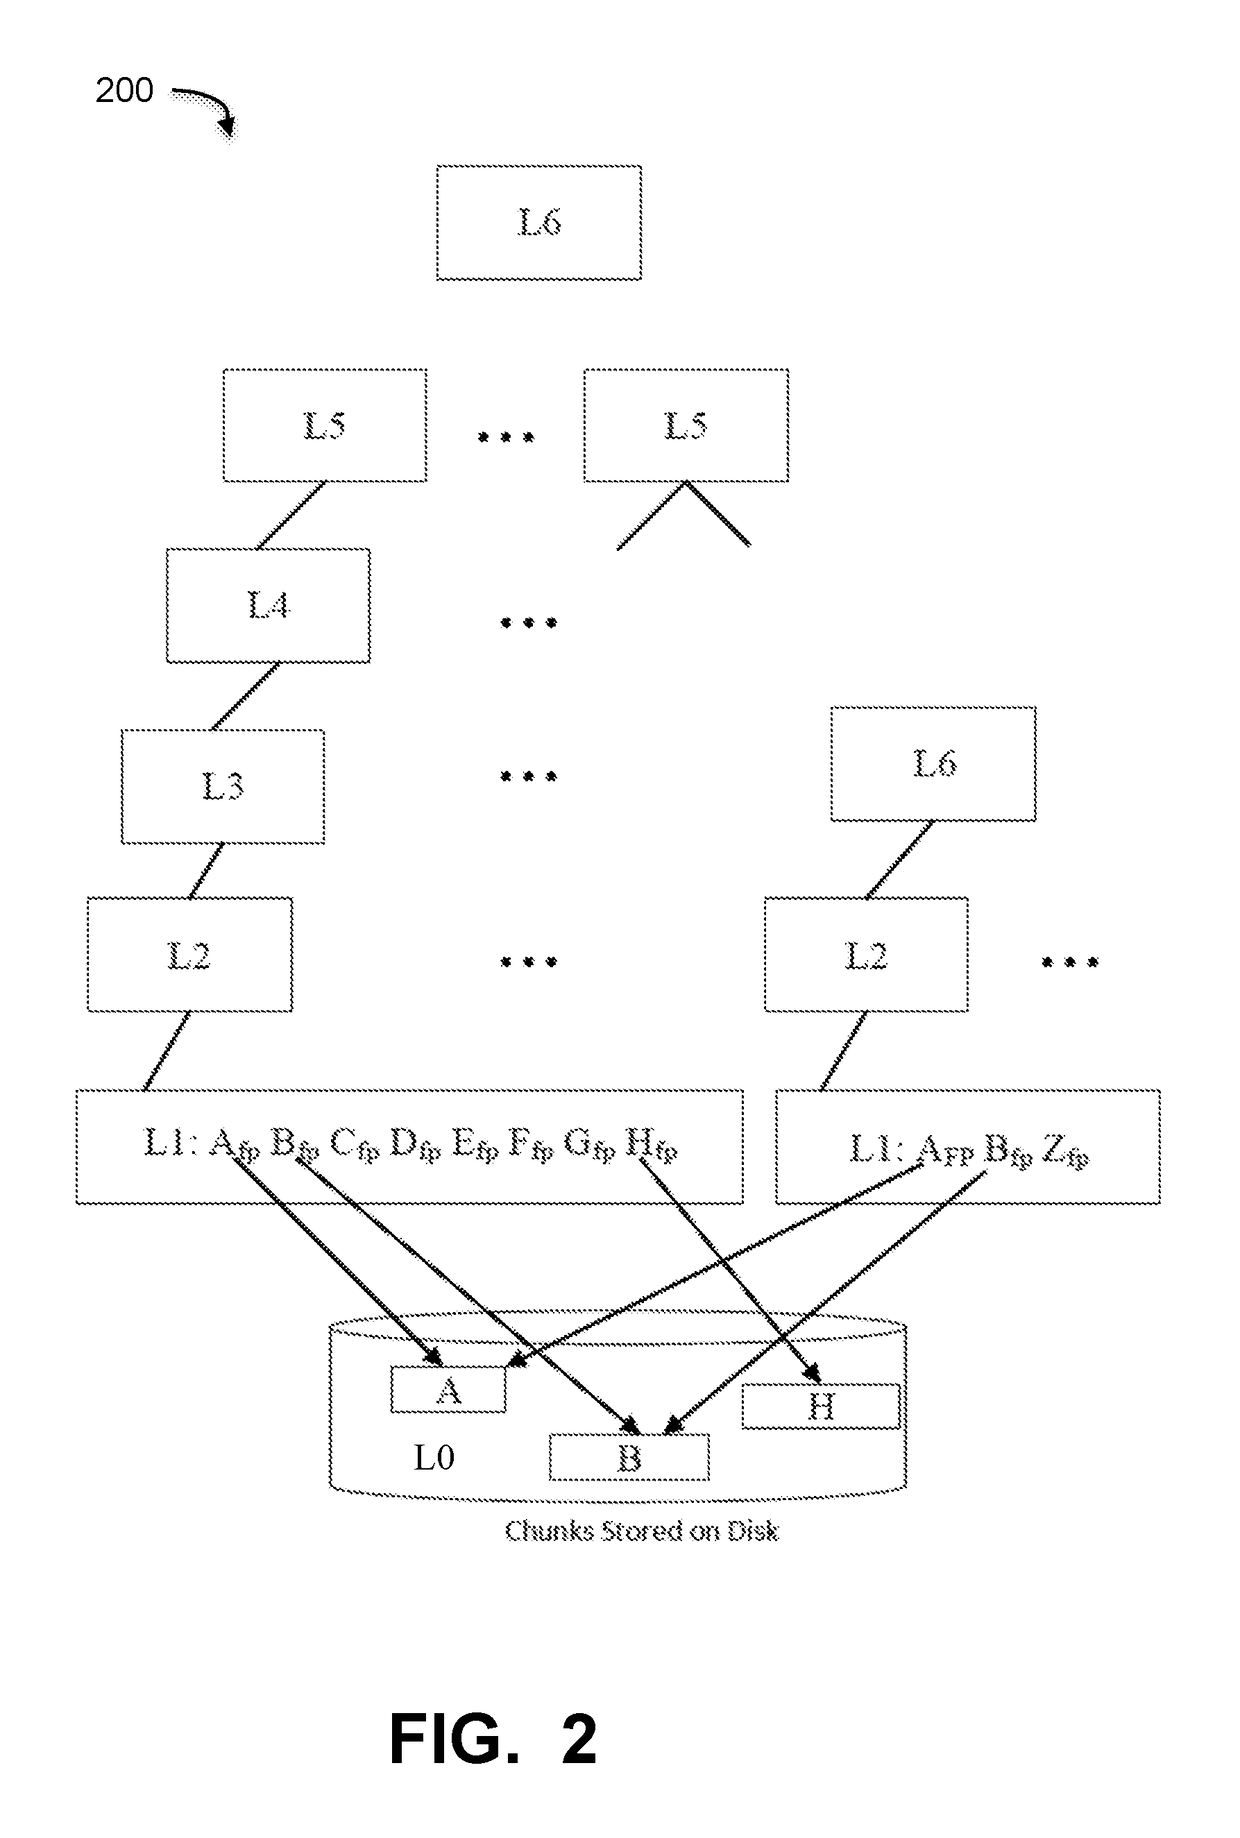 Dynamic duplication estimation for garbage collection